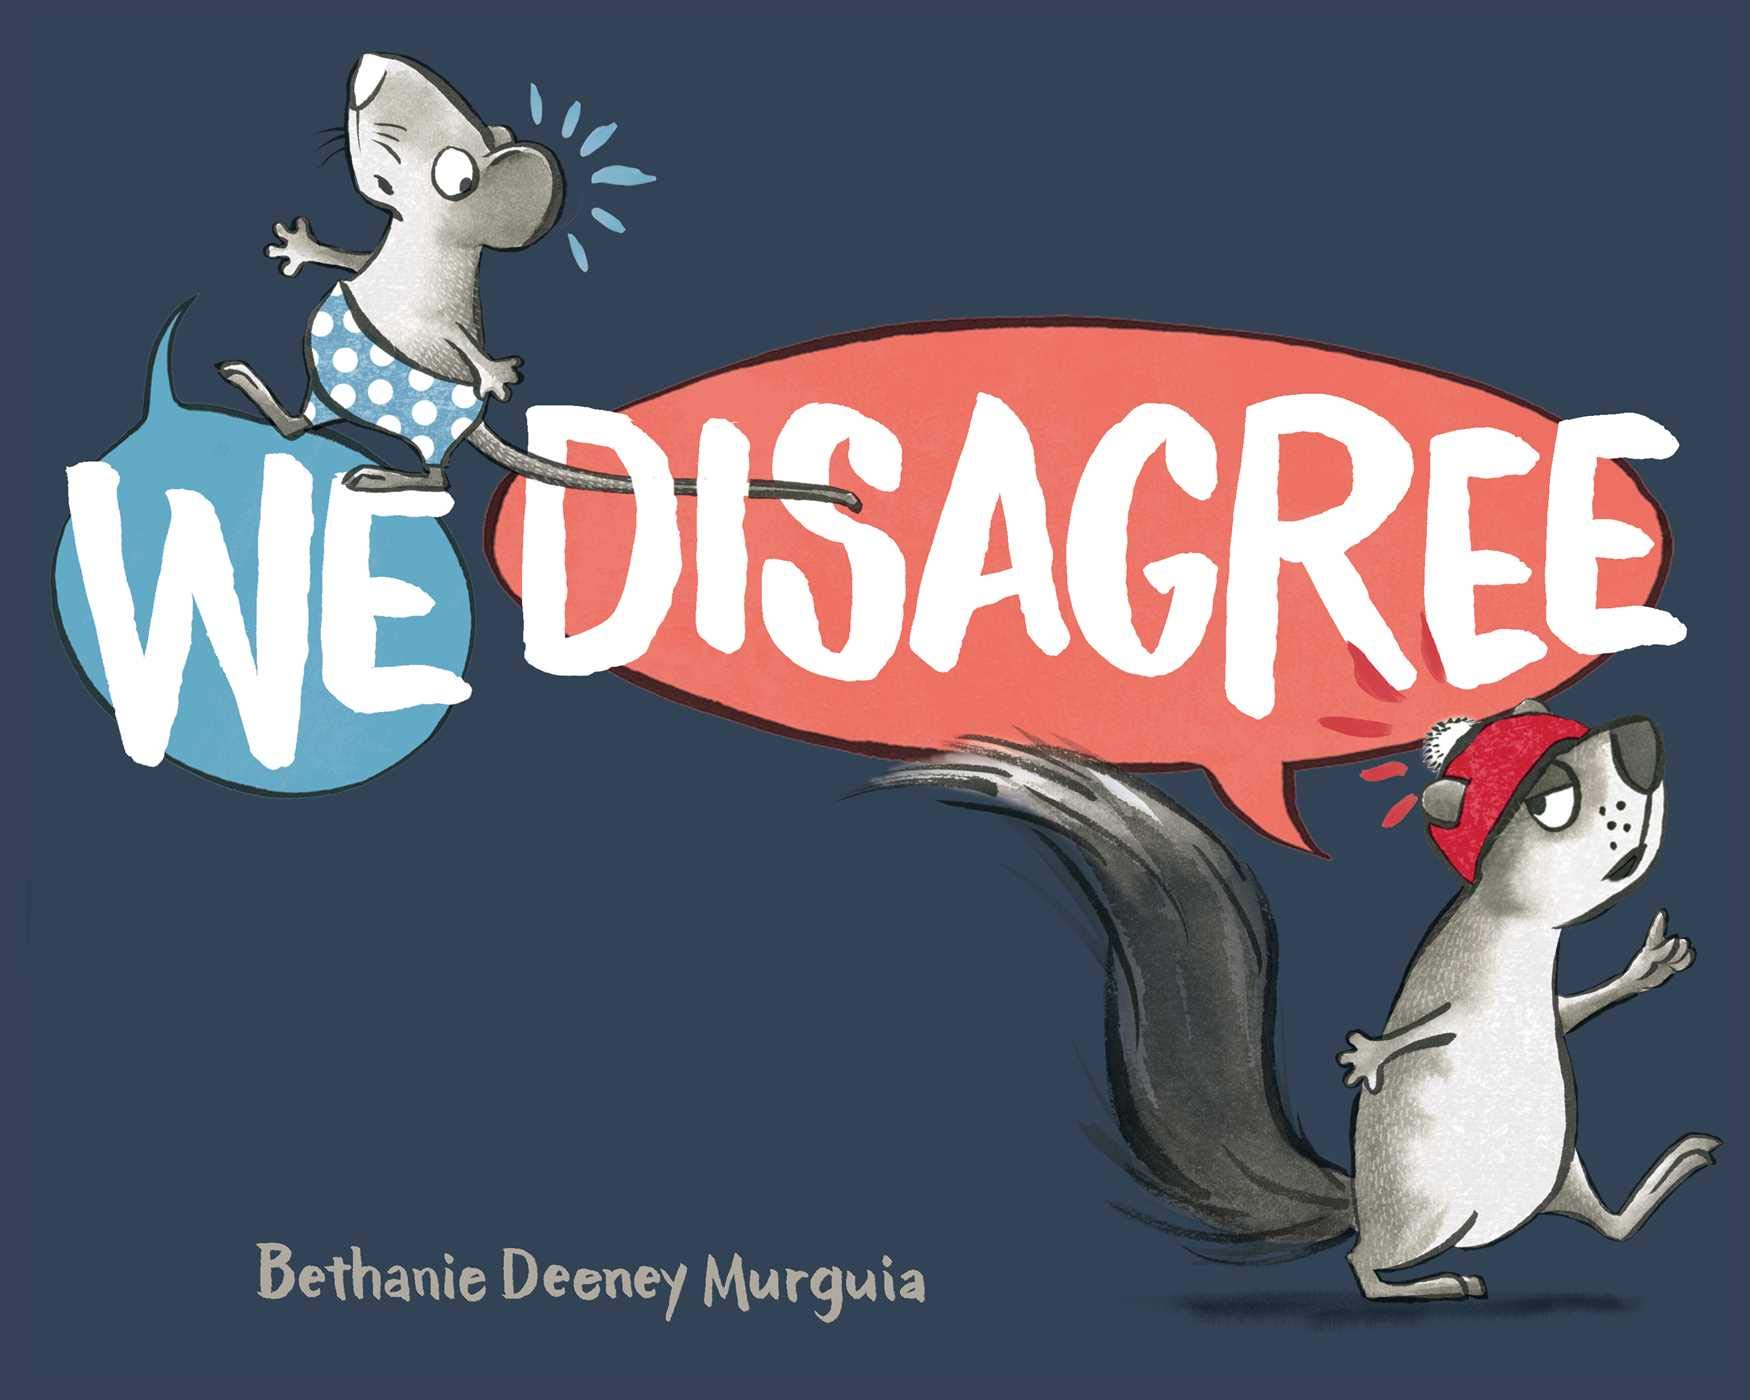 Image for "We Disagree"